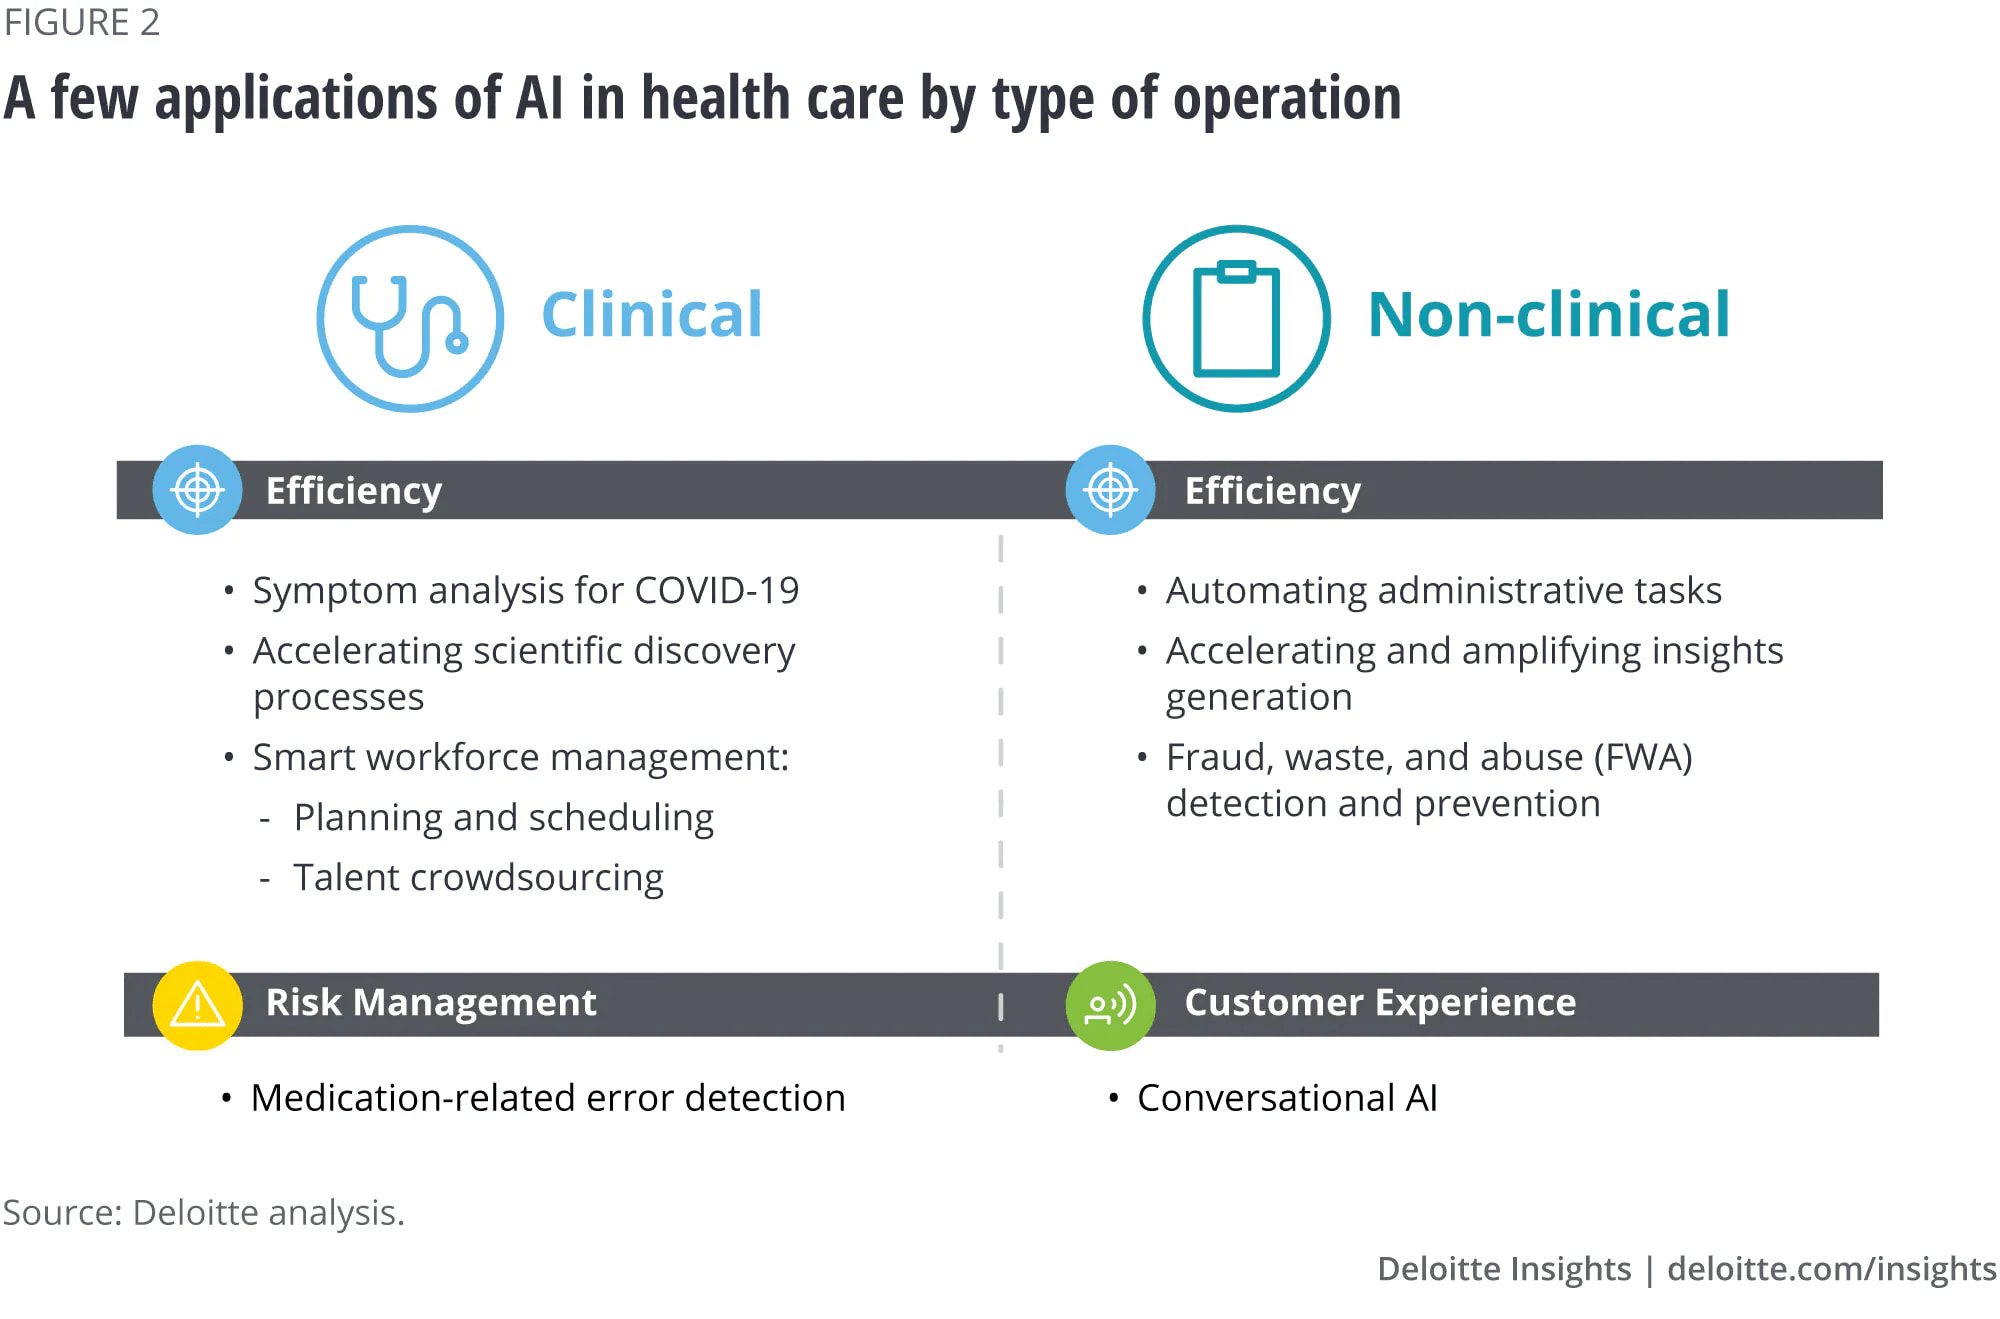 A few applications of AI in healthcare by type of operation - Source: Deloitte